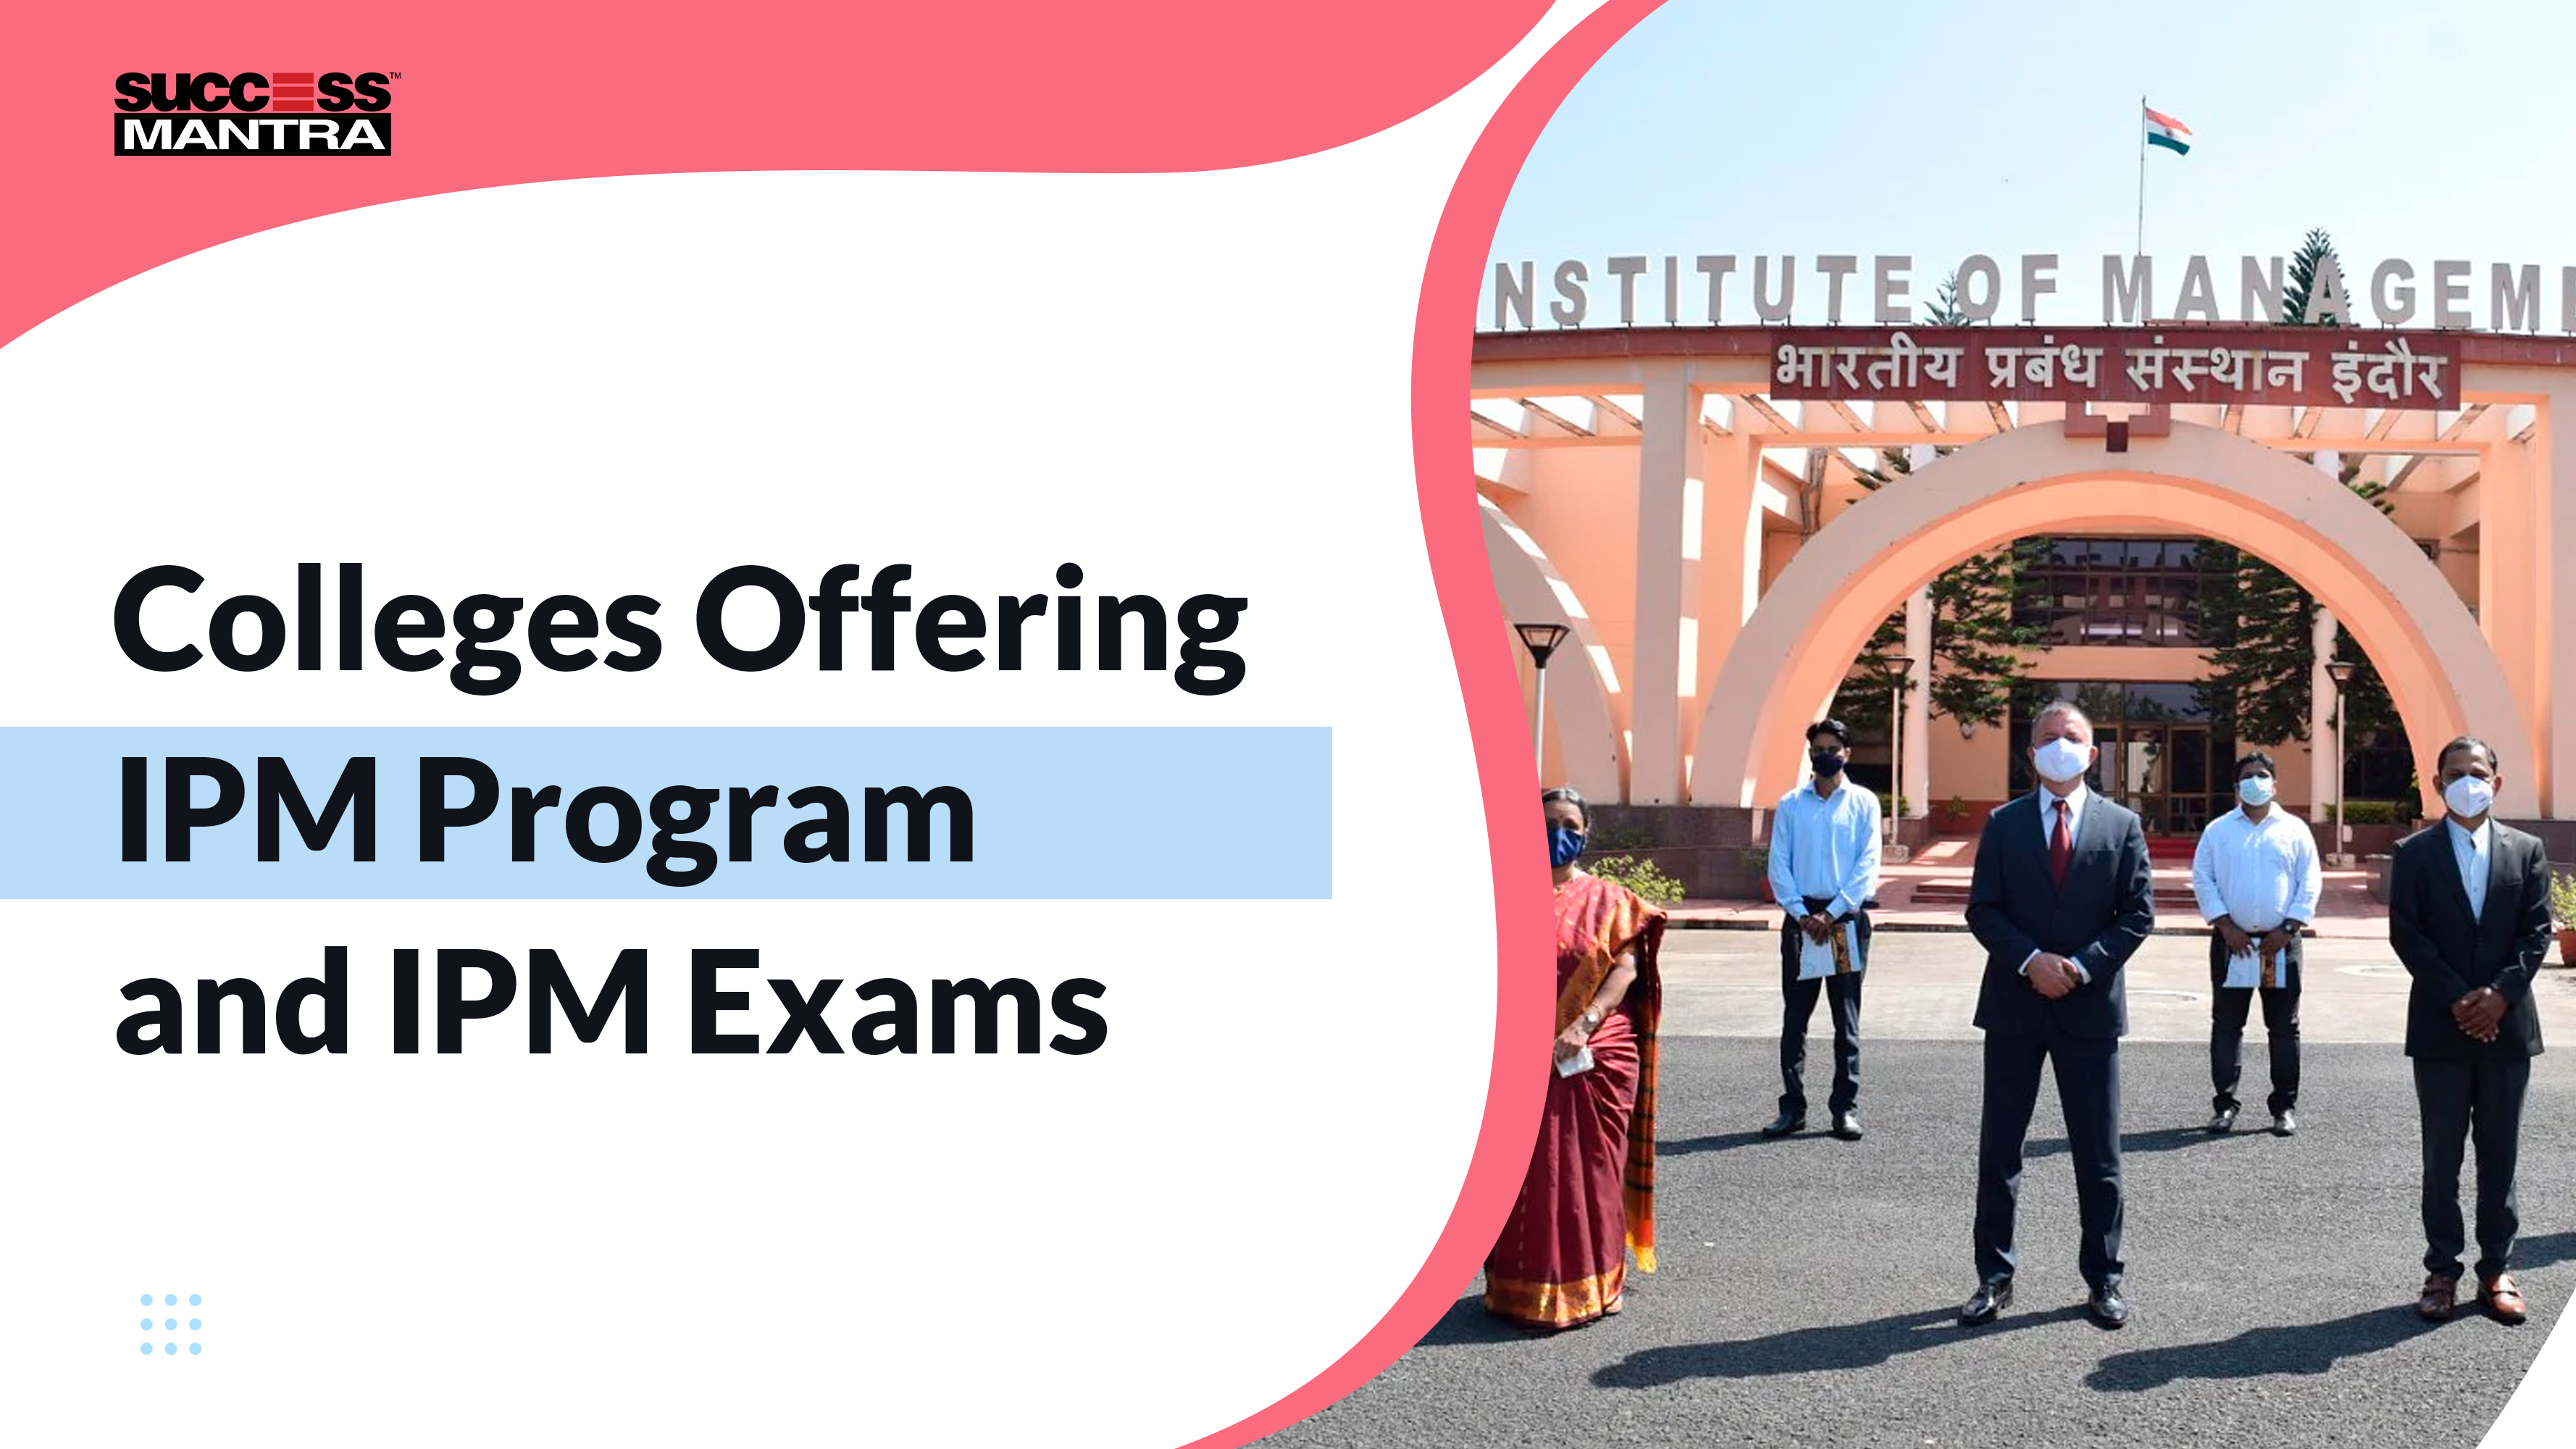 Colleges Offering IPM Program and IPM Exams 